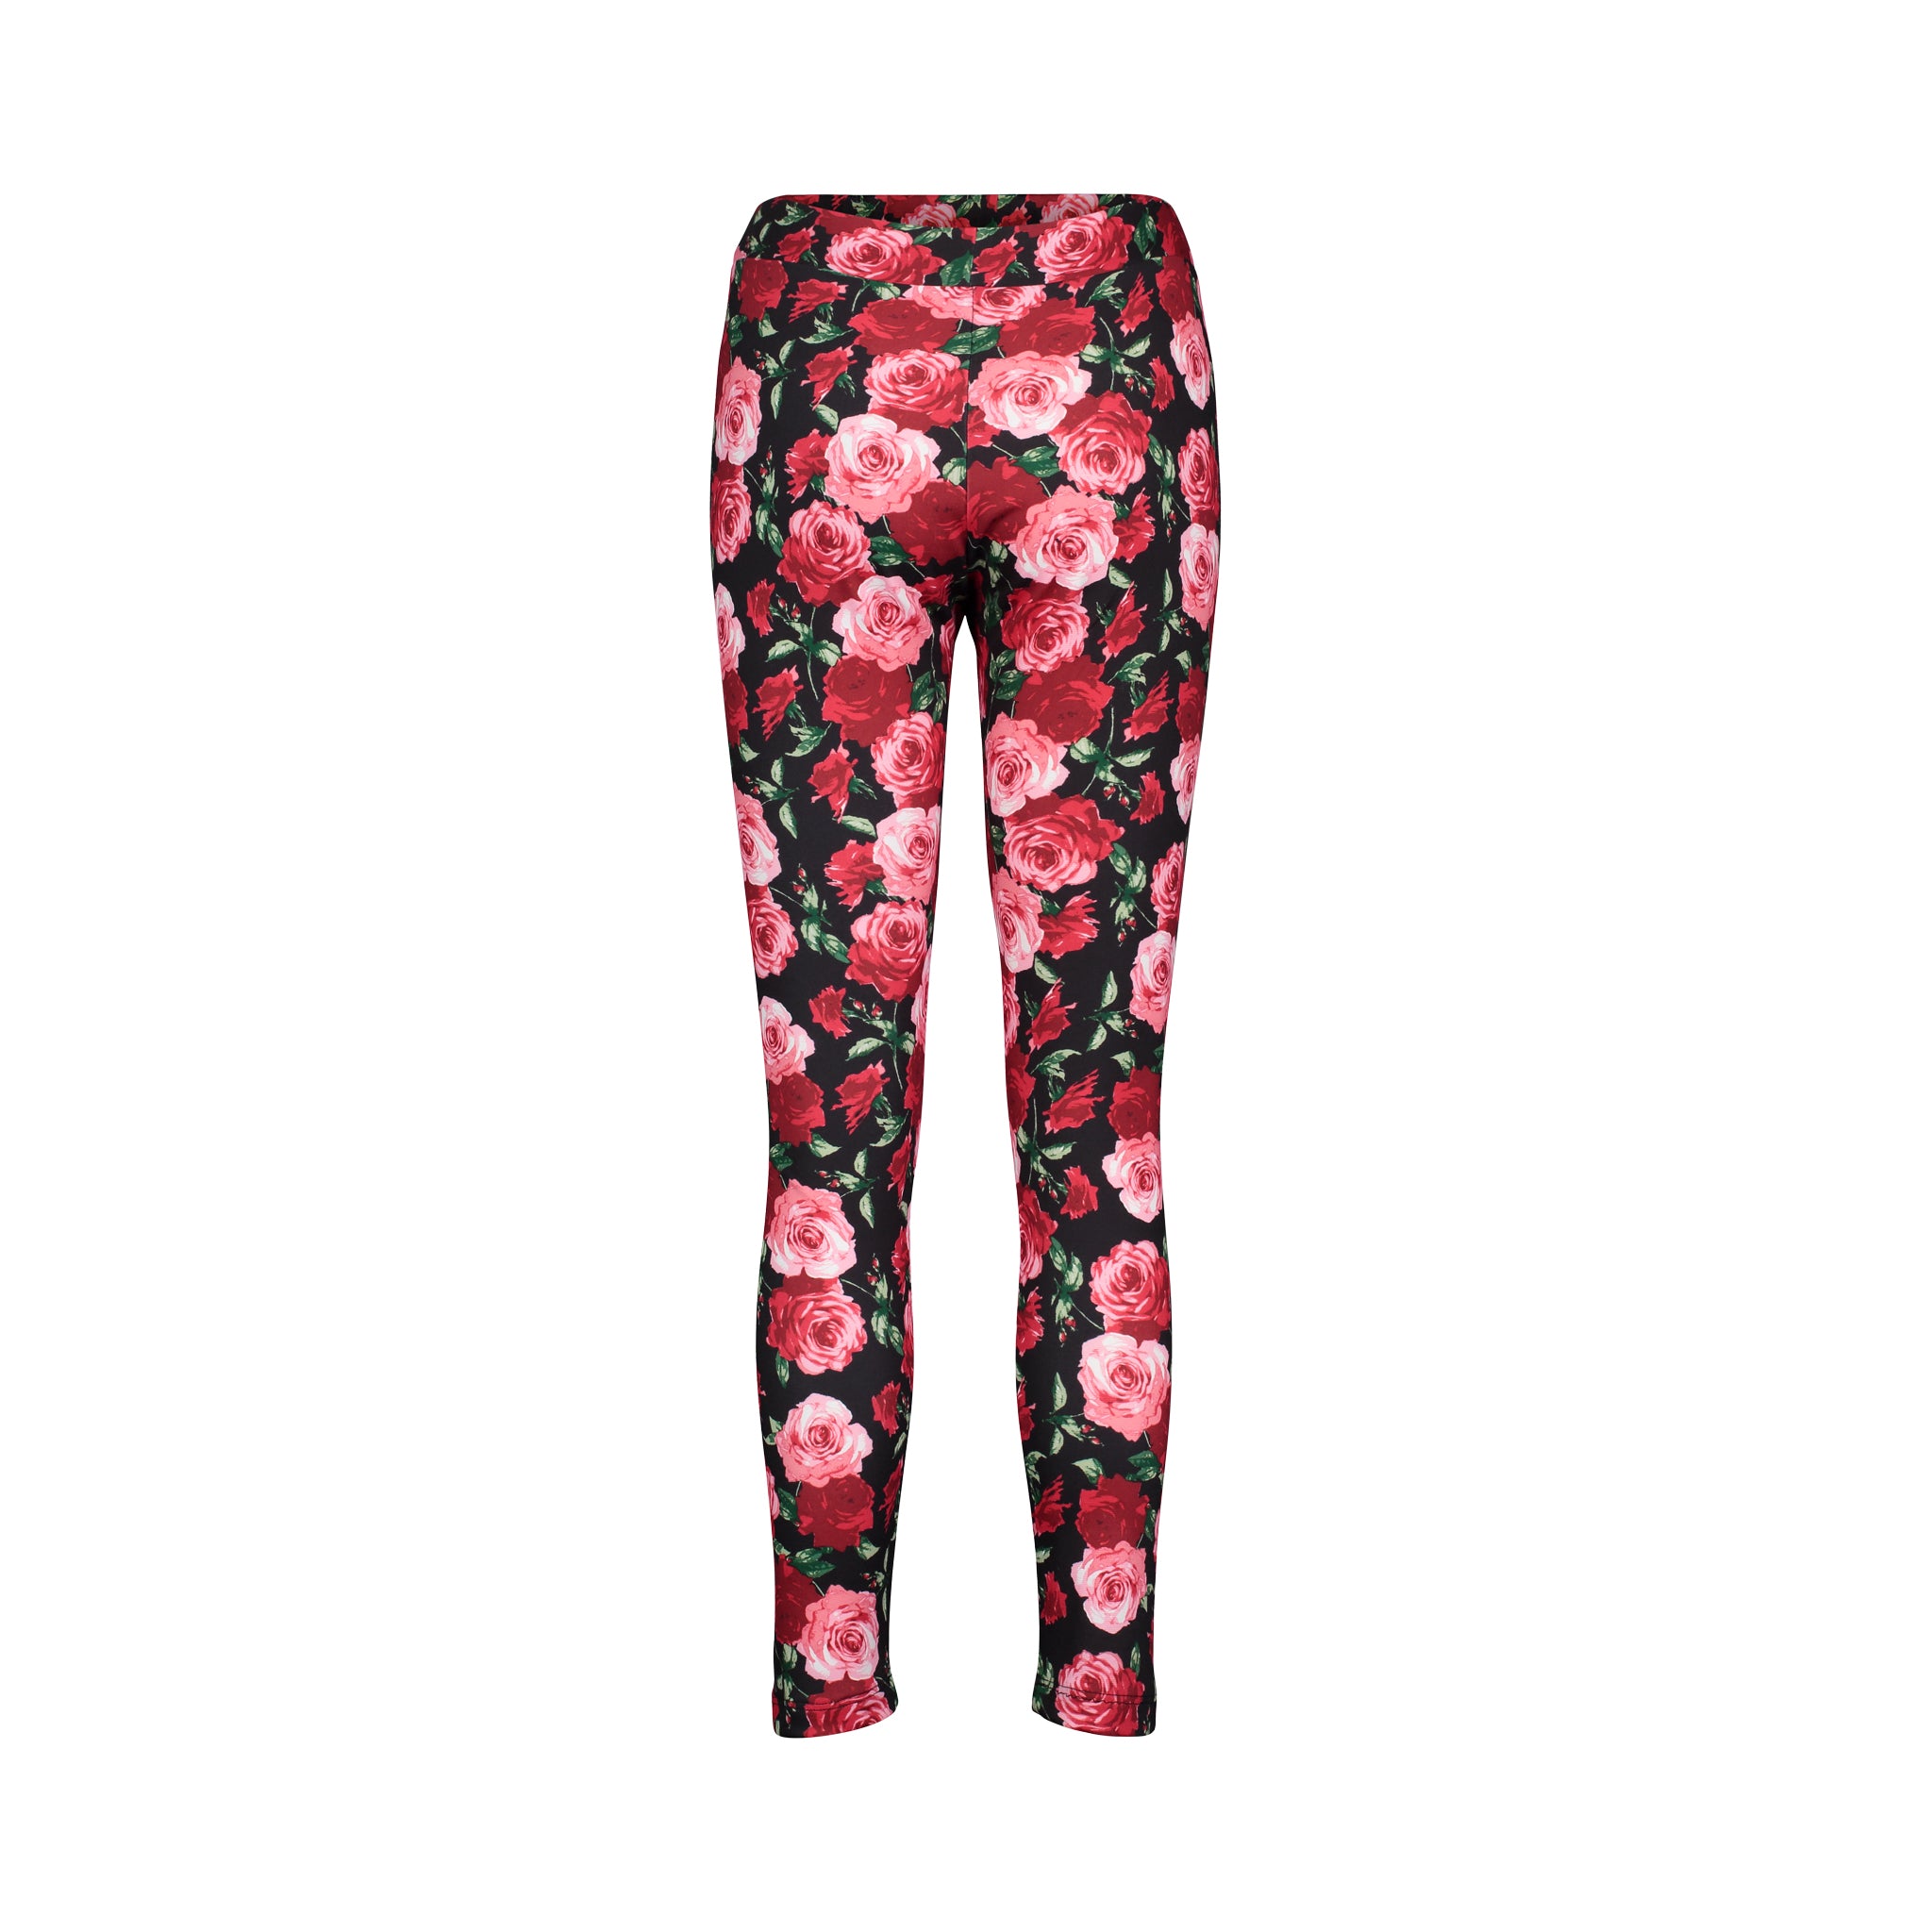 Lularoe One Size OS Roses Floral Black Red Pink Teal Polka Dot Leggings (OS  fits Adults 2-10) at  Women's Clothing store